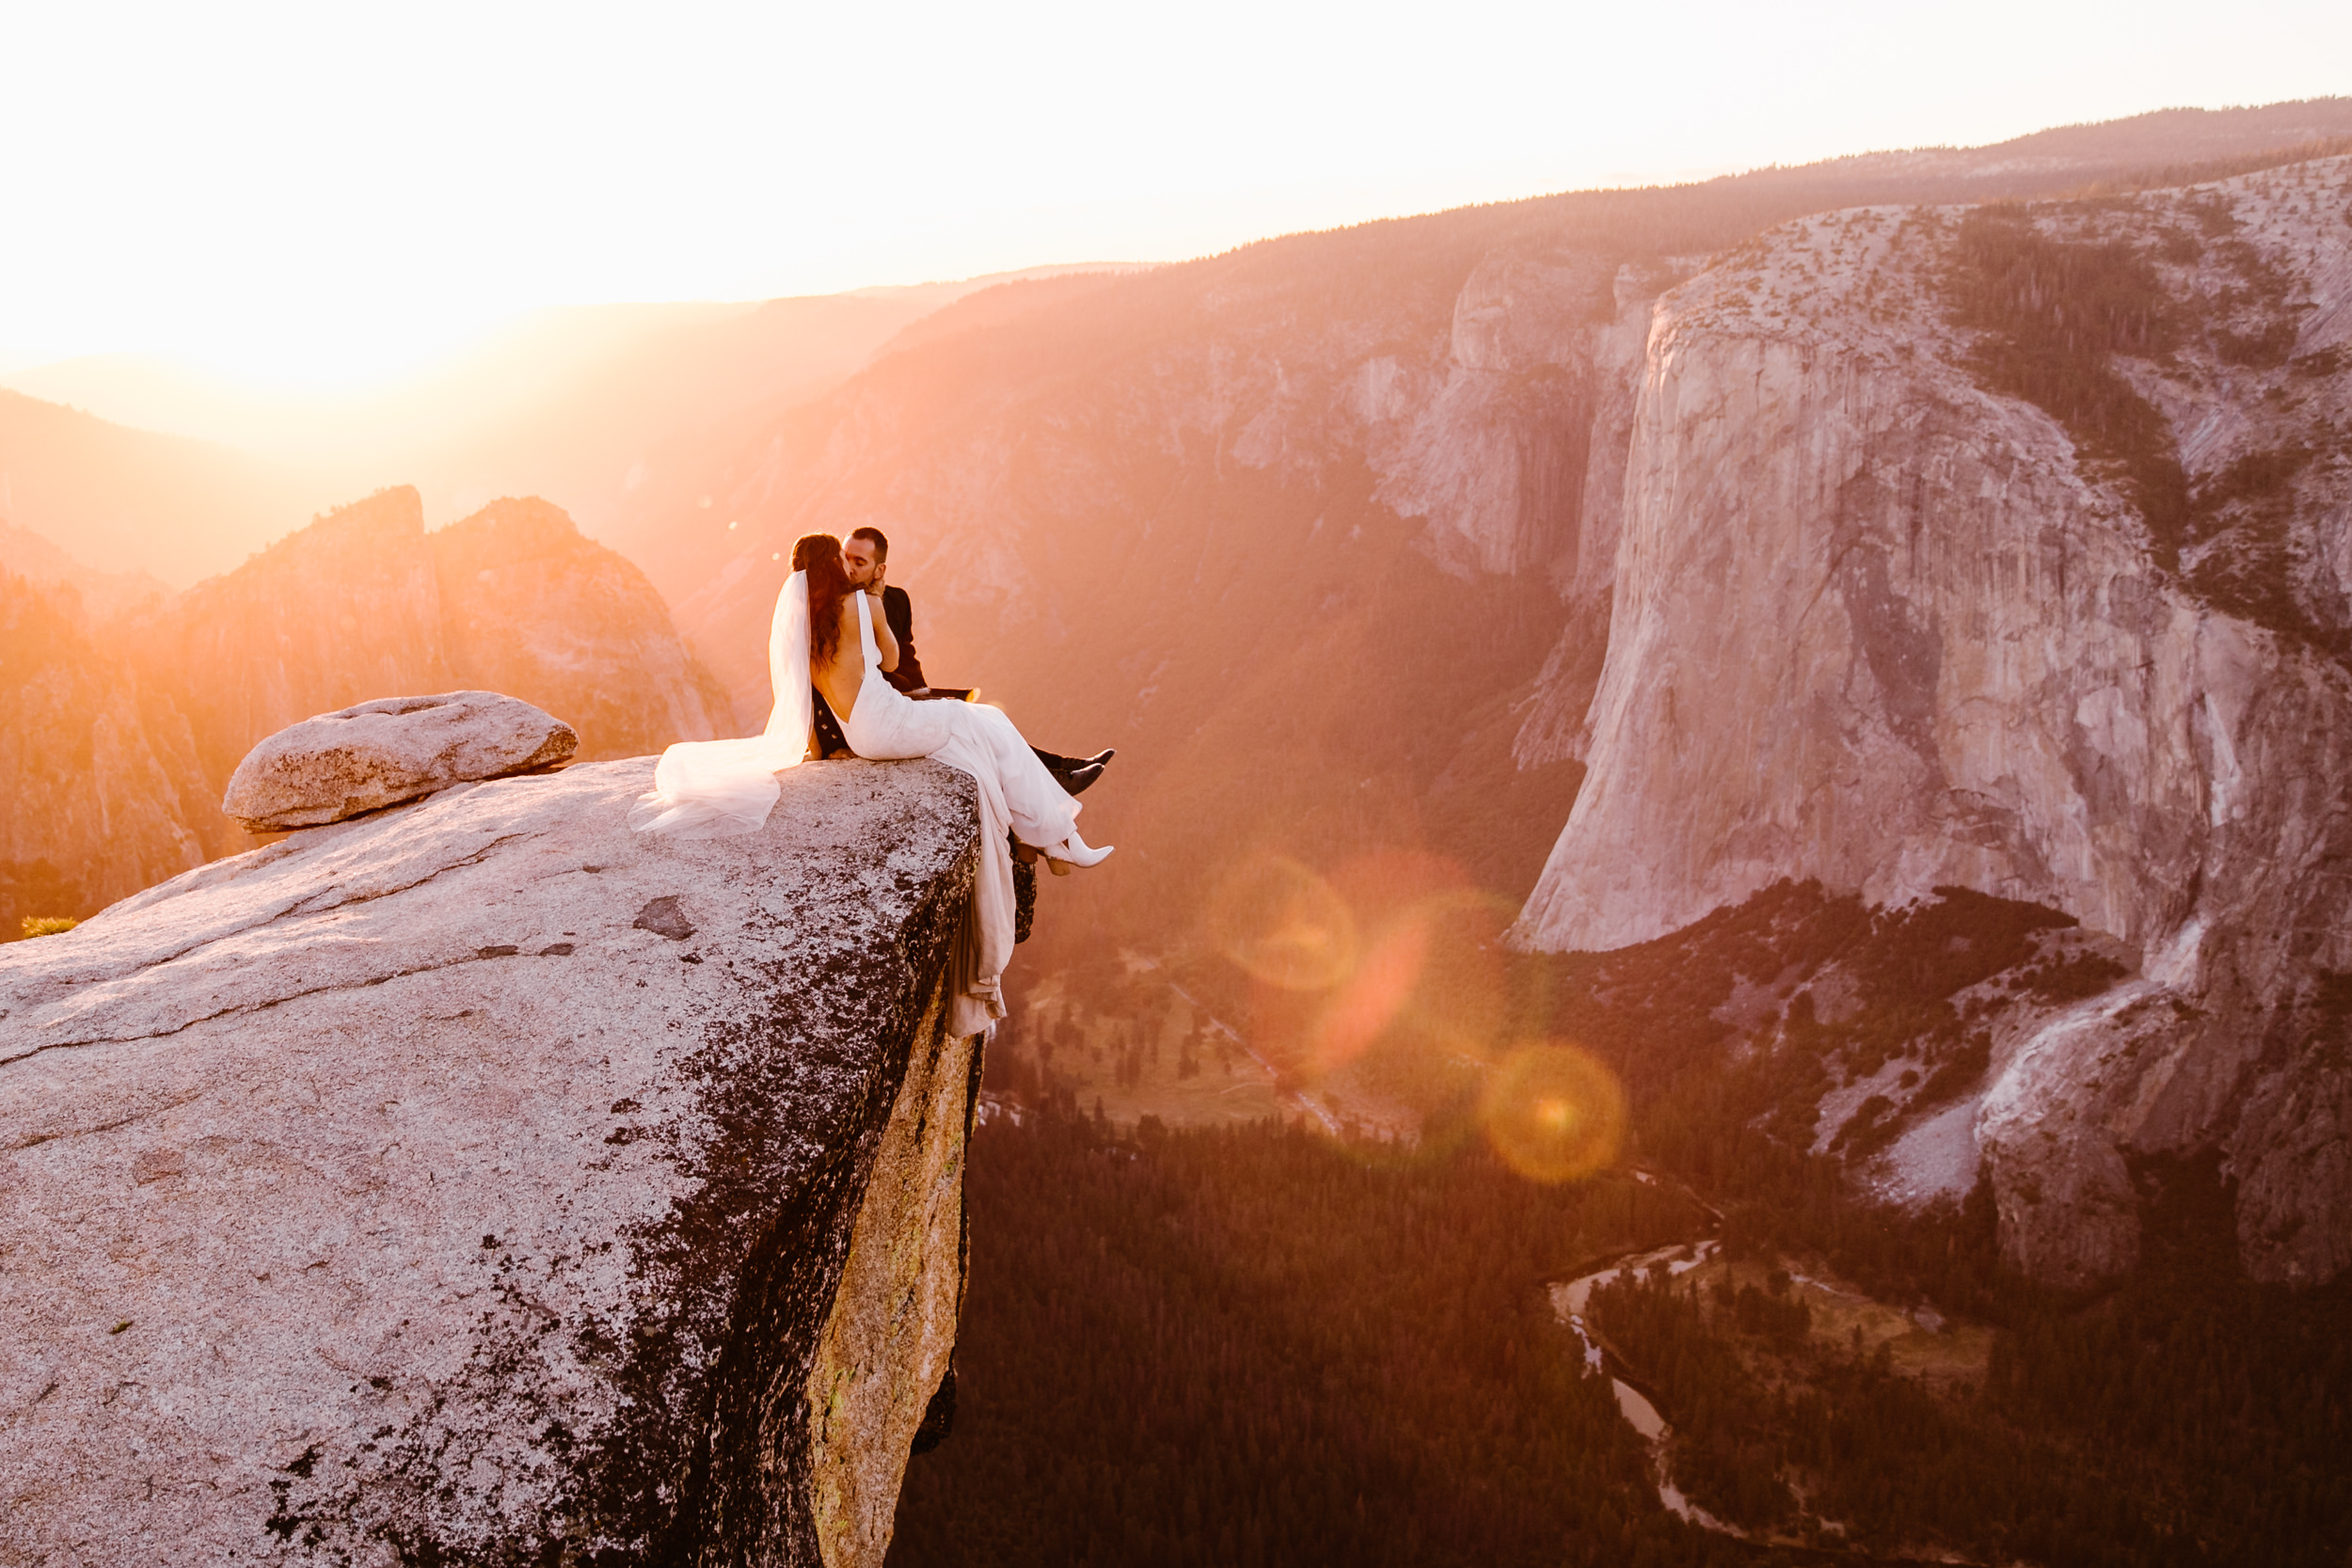 destination elopement in yosemite national park | ceremony + portraits at taft point | groom wearing a kilt + bride wearing boots | the hearnes elopement photography